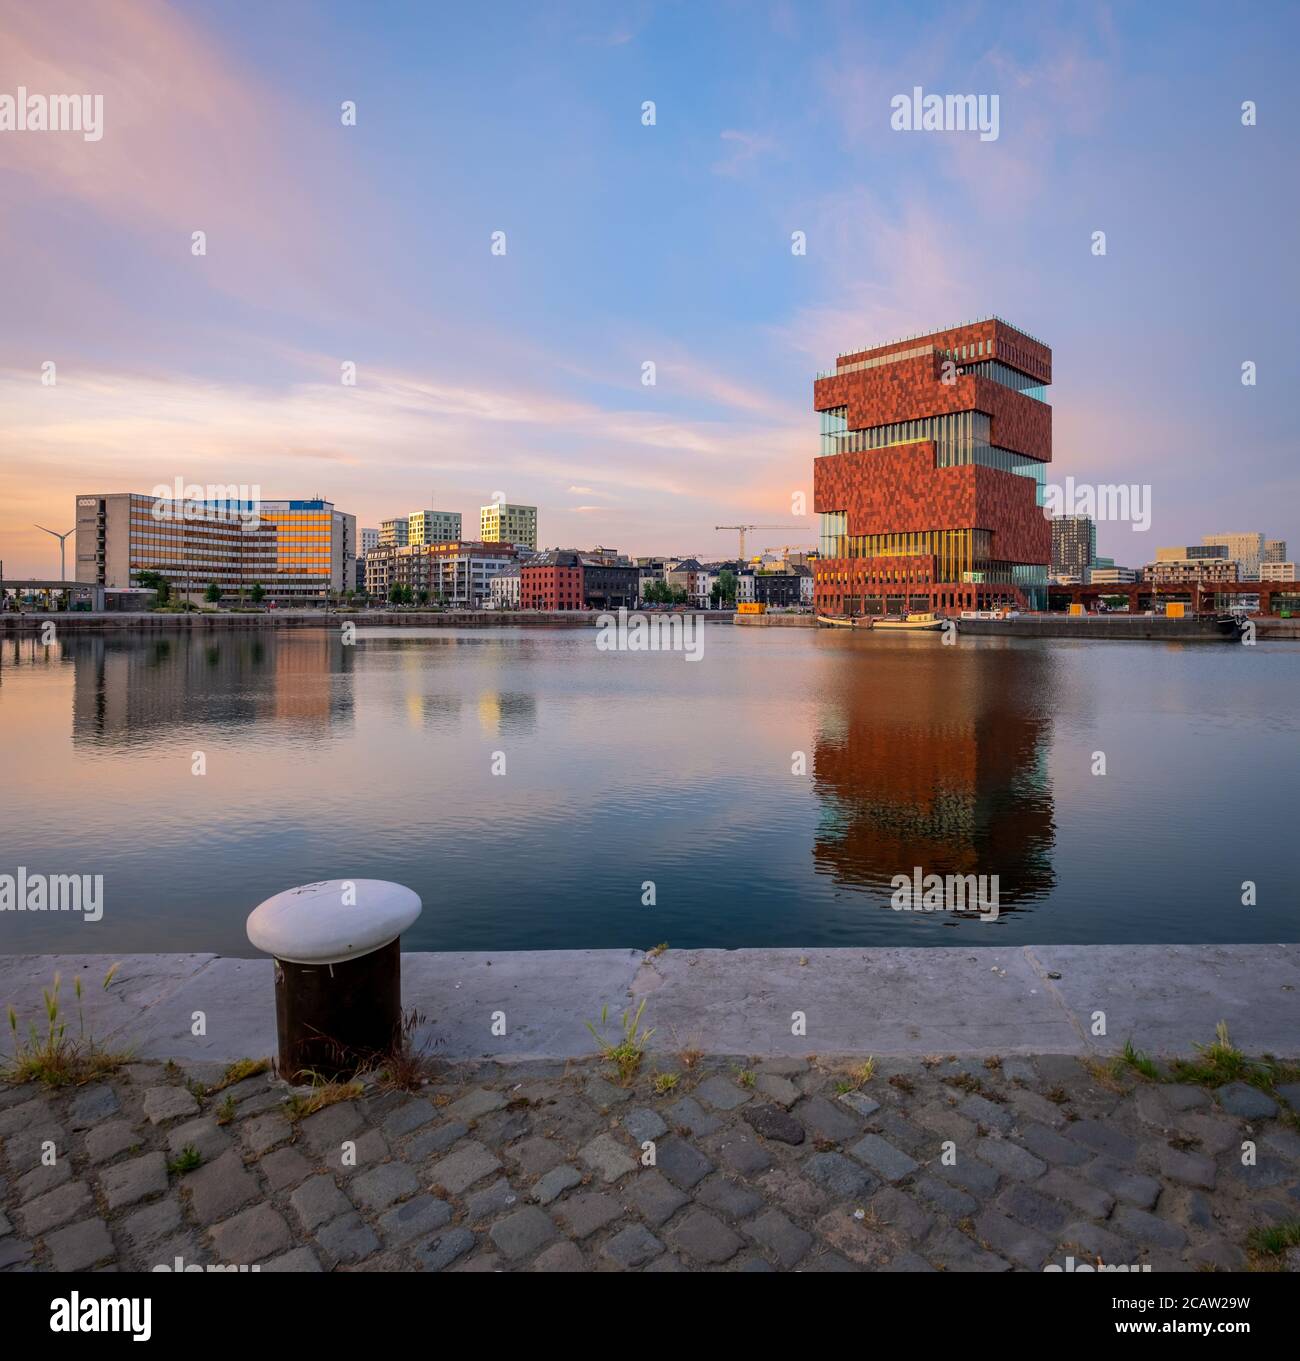 The landmark MAS museum reflected in the Bonaparte dock in the Northern part of the city of Antwerp. Old metal bollard in the foreground Stock Photo